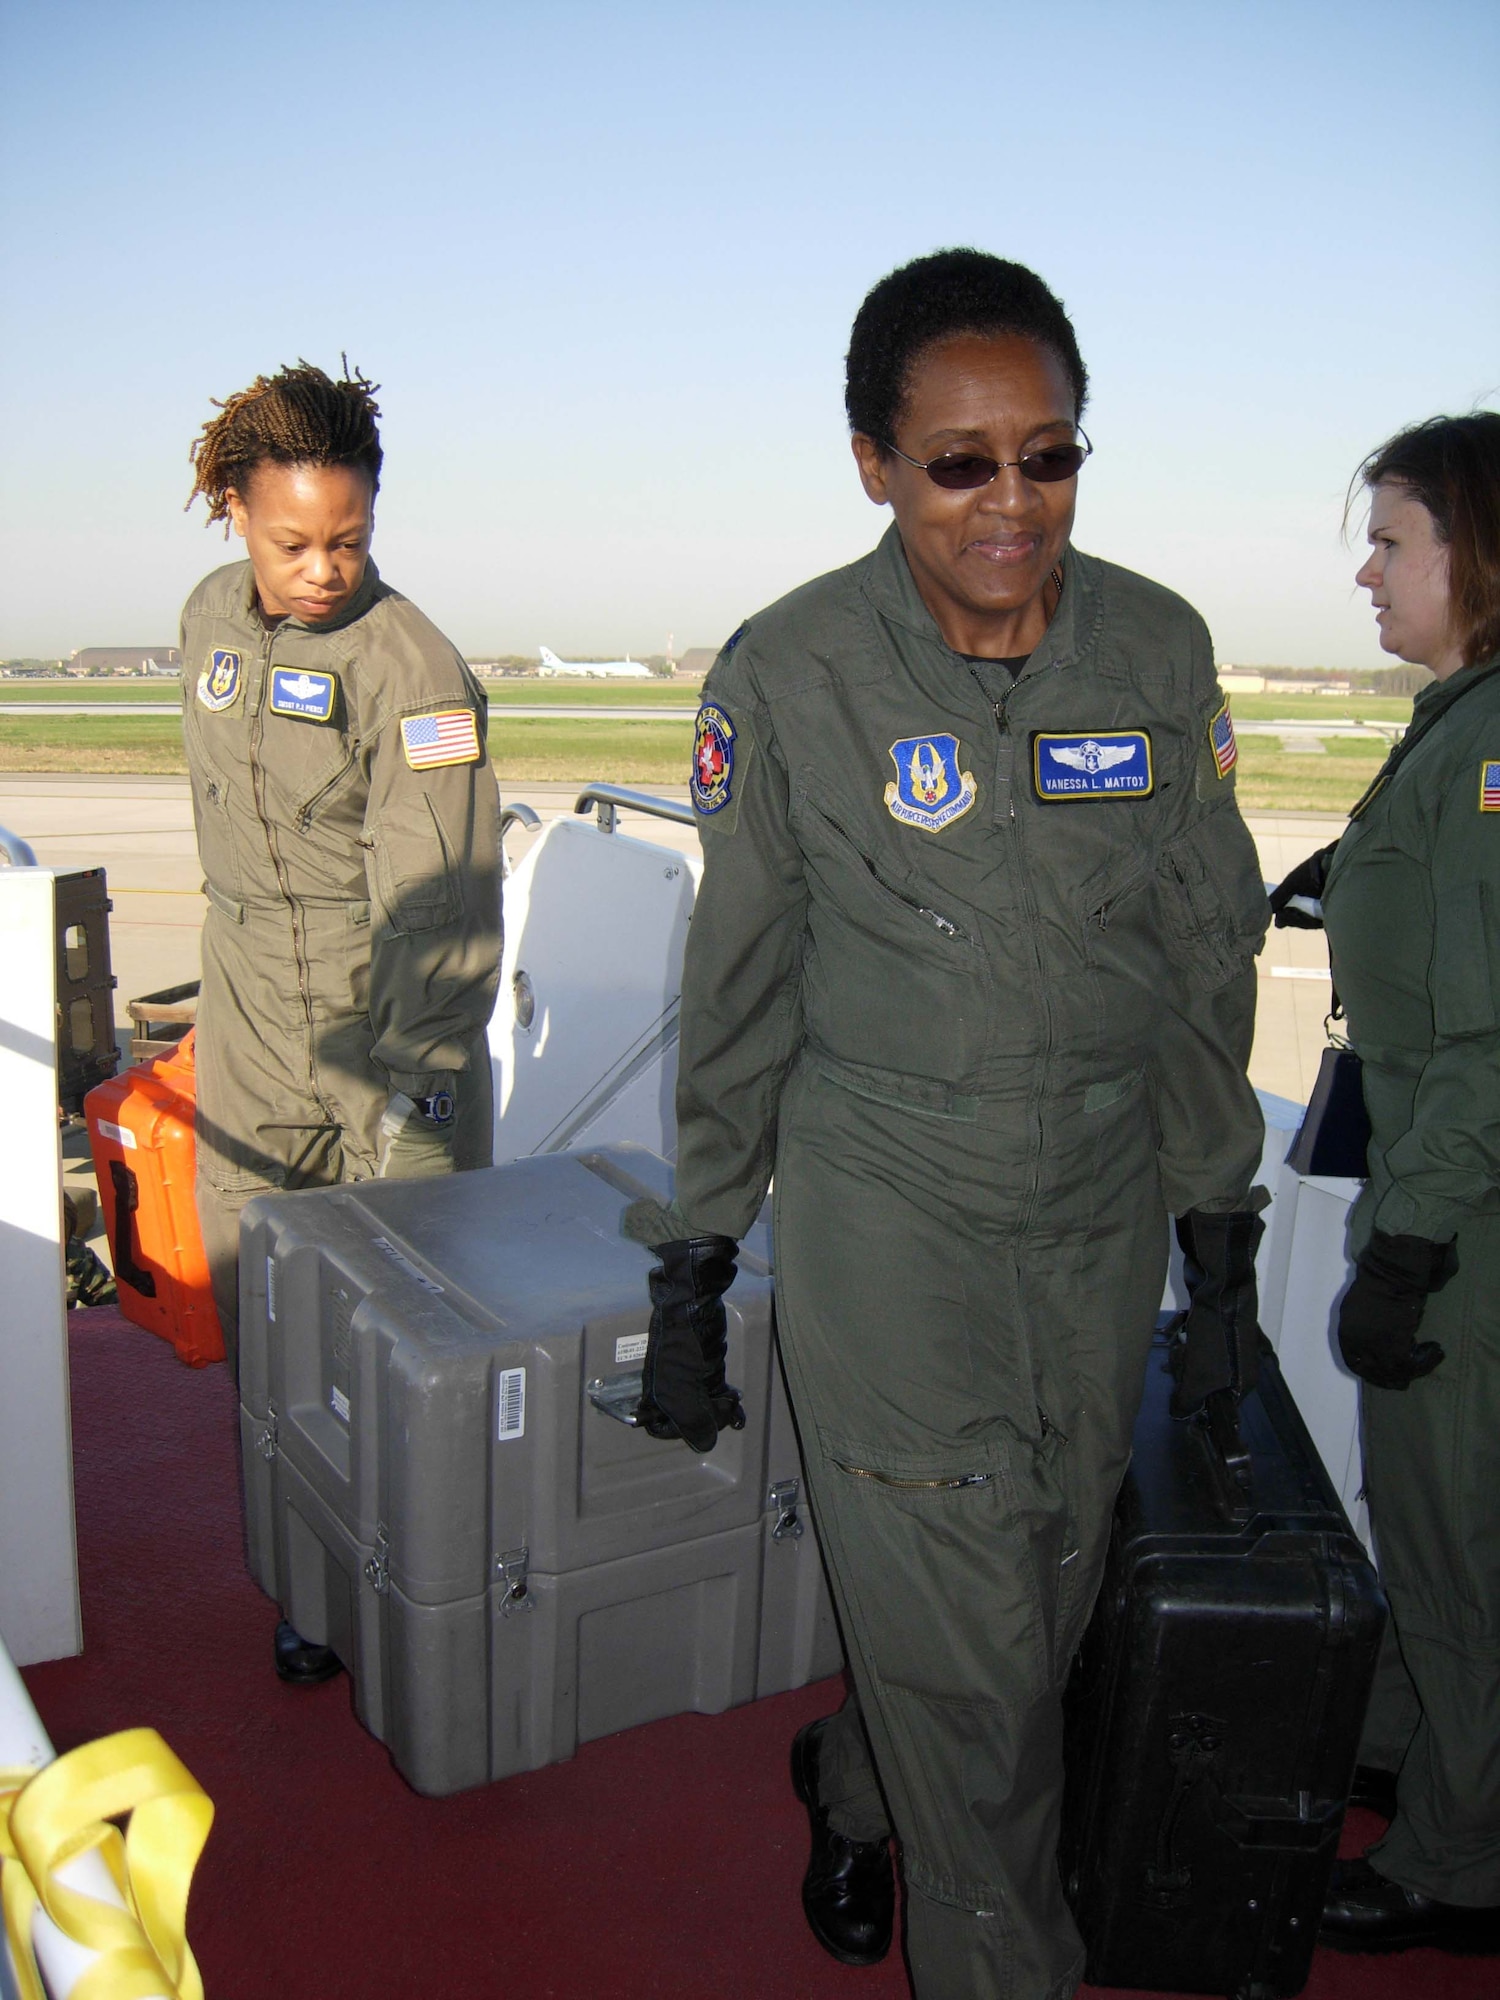 ANDREWS AIR FORCE BASE, Md. -- Senior Master Sgt. P.J. Pierce, 459th Aeromedical Evacuation Squadron medical technician, Lt. Col. Vanessa Mattox, 459th AES commander, and Tech. Sgt. Crystal Drake, 459th AES medical technician, load medical equipment aboard a KC-135 Stratotanker prior to take off for an in-flight exercise. Ten members of the 439th AES joined 459th AES members in a blended AE training mission to the island. Mission training expanded beyond the medical realm to include air refueling and an overseas sortie. (U.S. Air Force photo/Staff Sgt. Amaani Lyle)